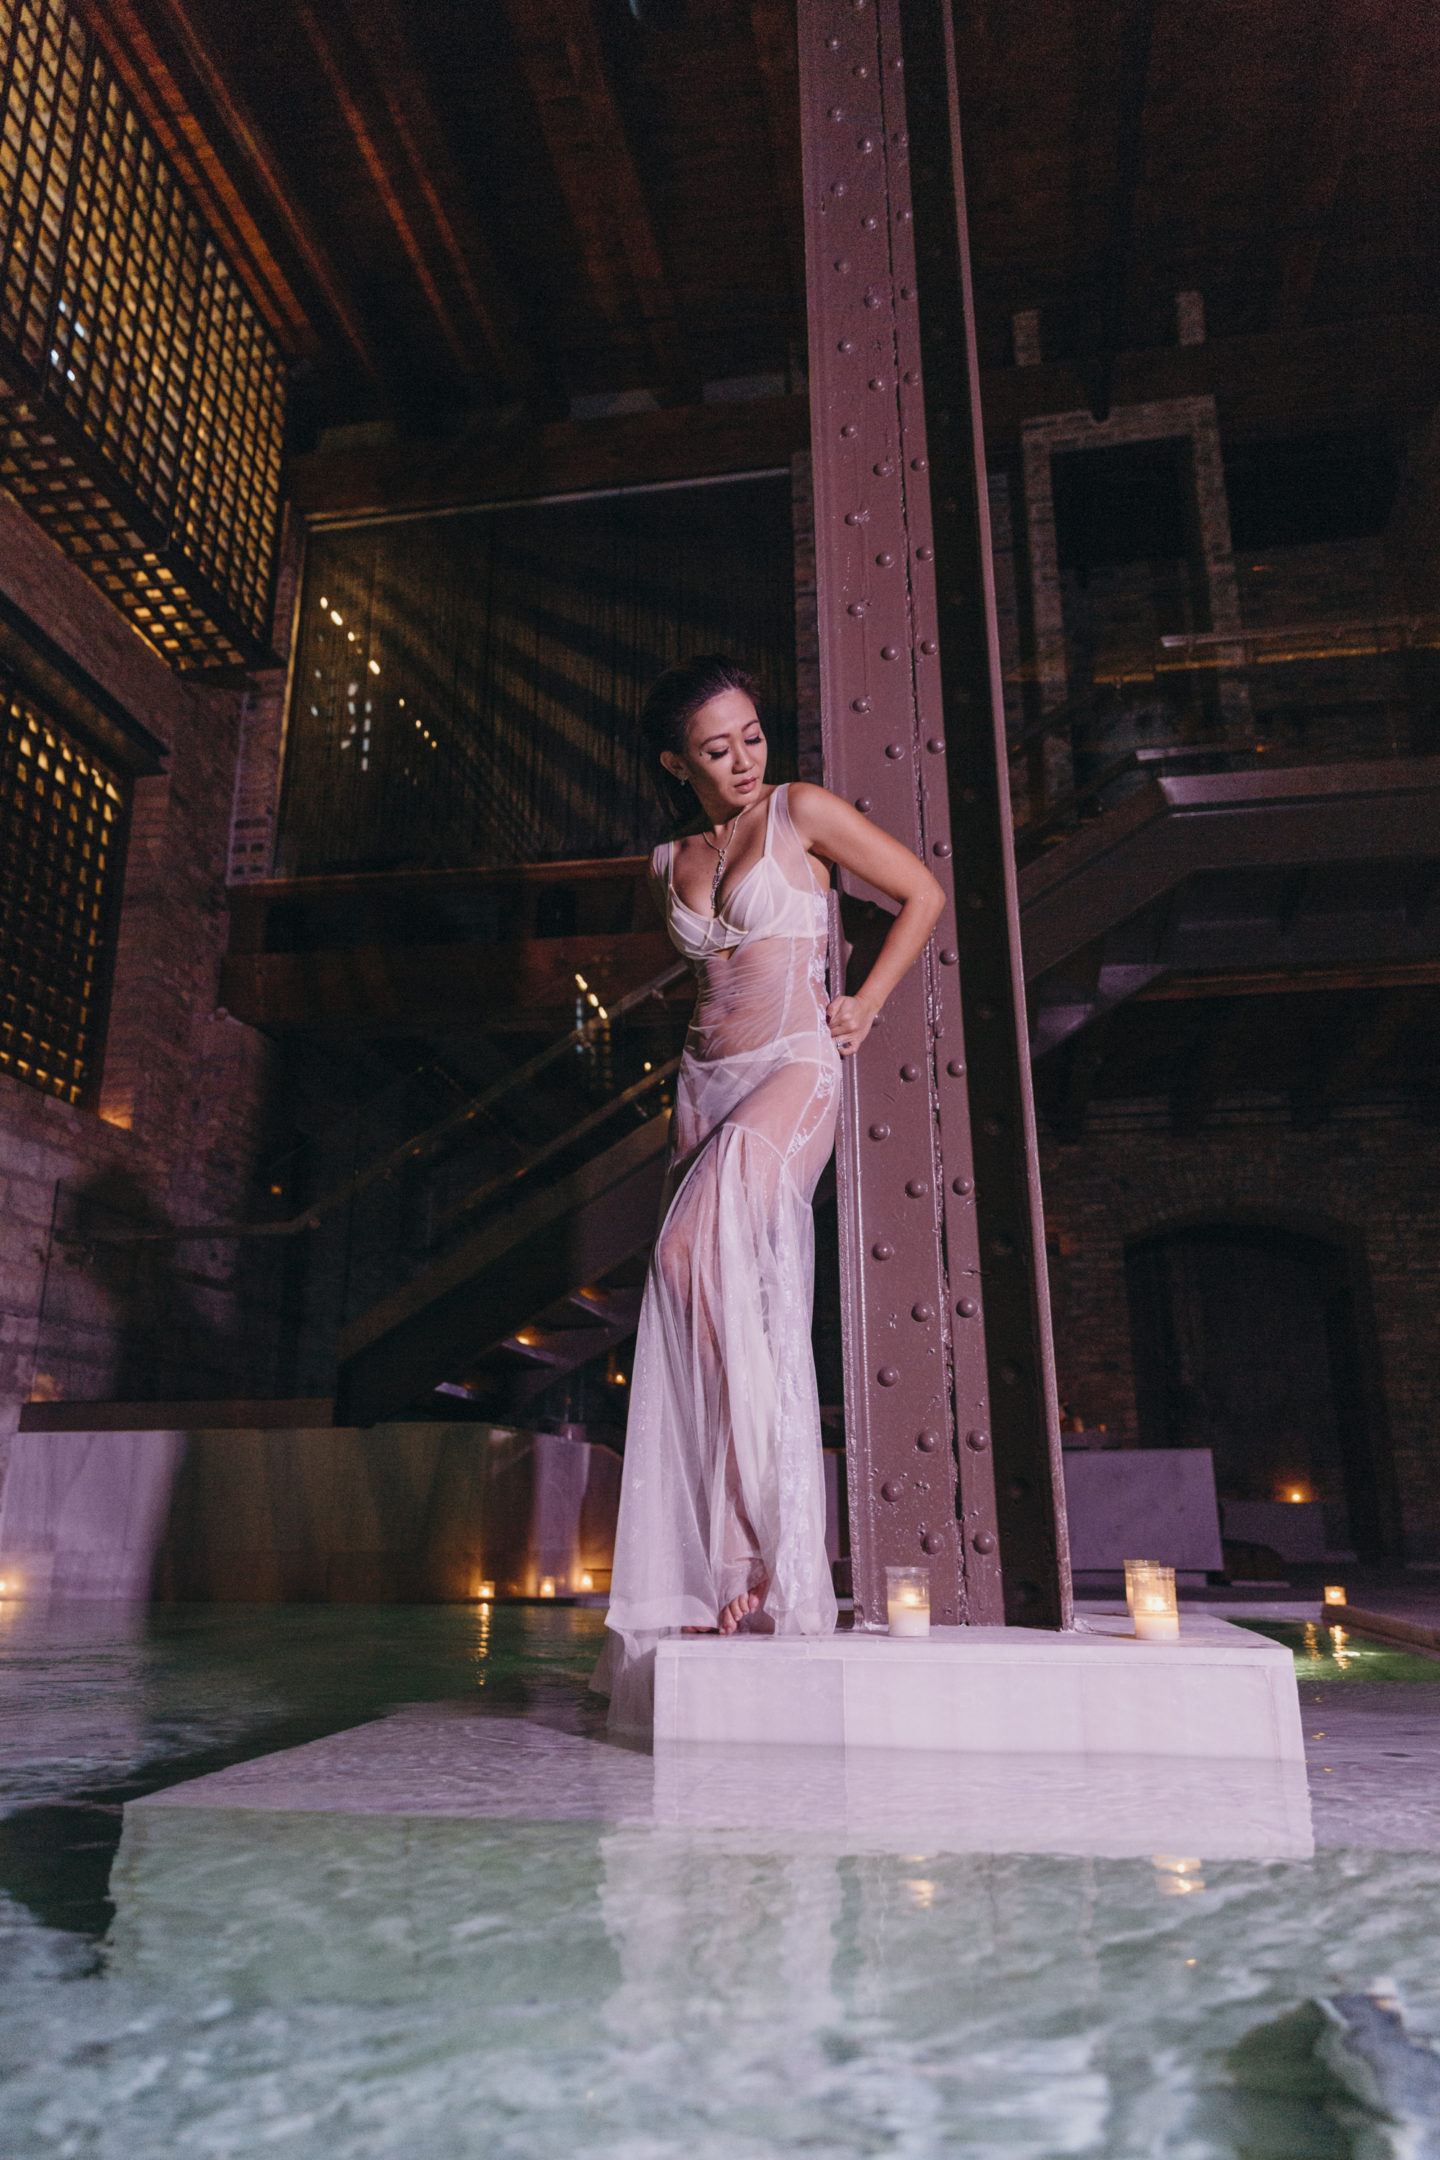 aire ancient baths photoshoot with alina tsvor